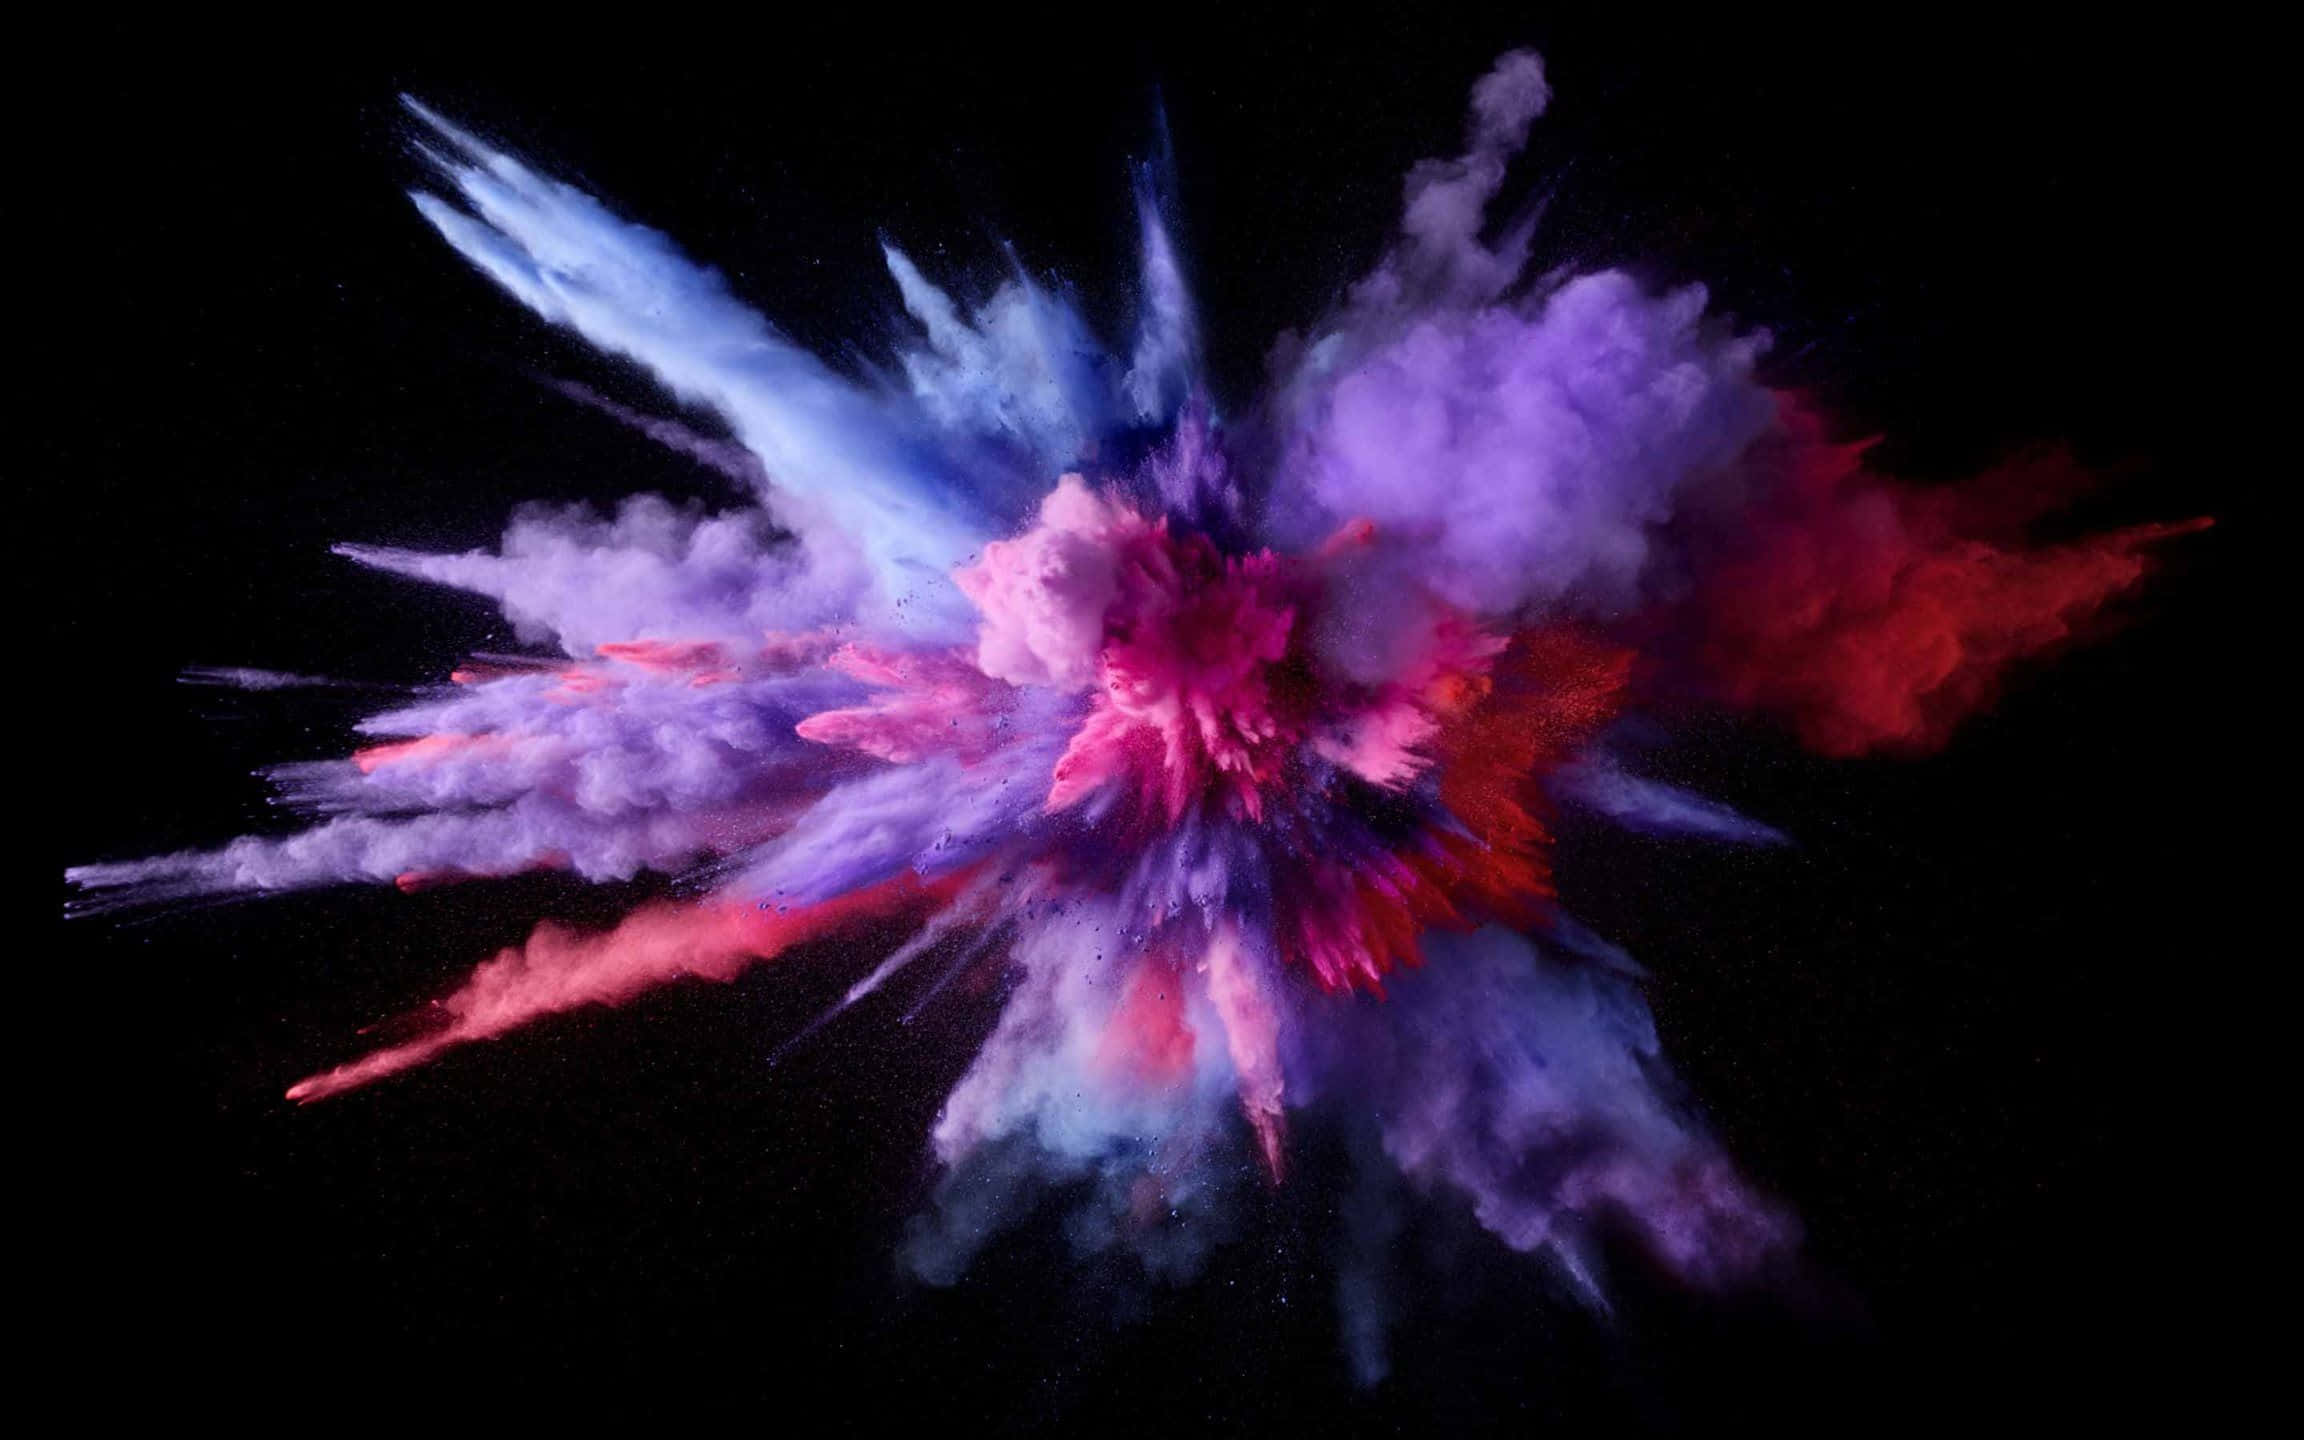 Powerful Explosion in a Colorful Cloud